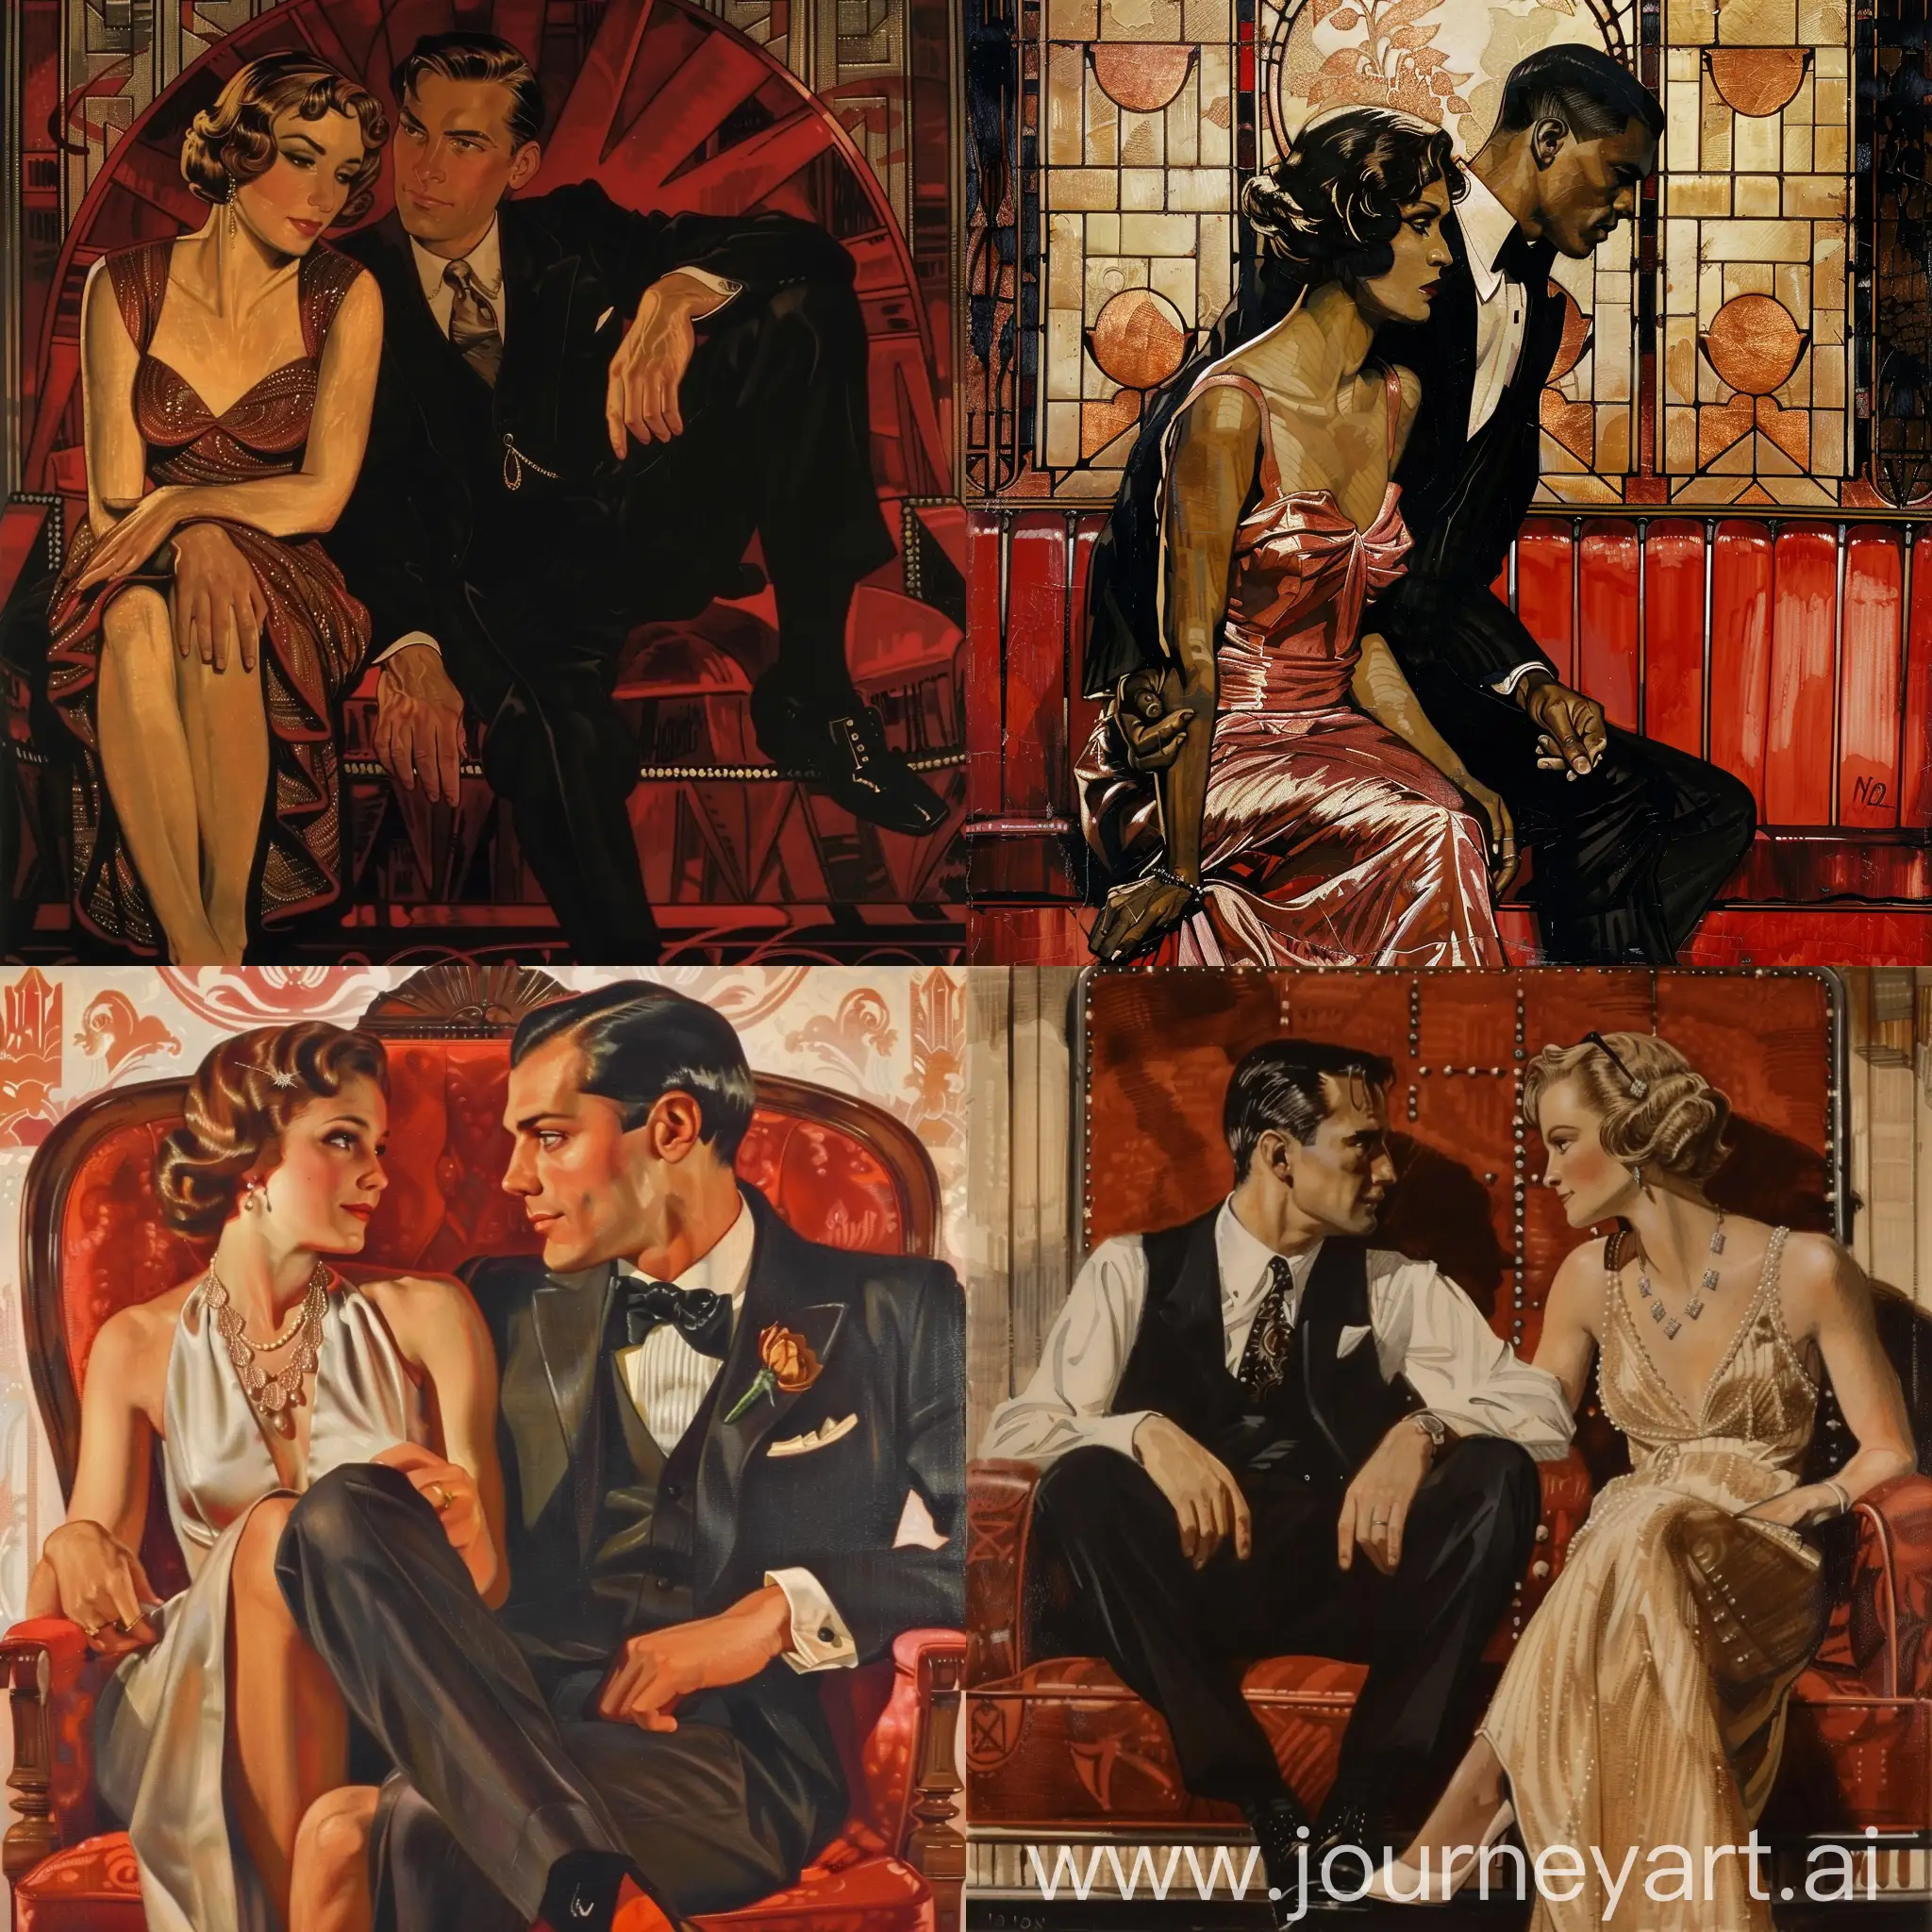 Art-Deco-Style-Couple-Woman-Showing-Dress-to-Seated-Man-in-Red-Room